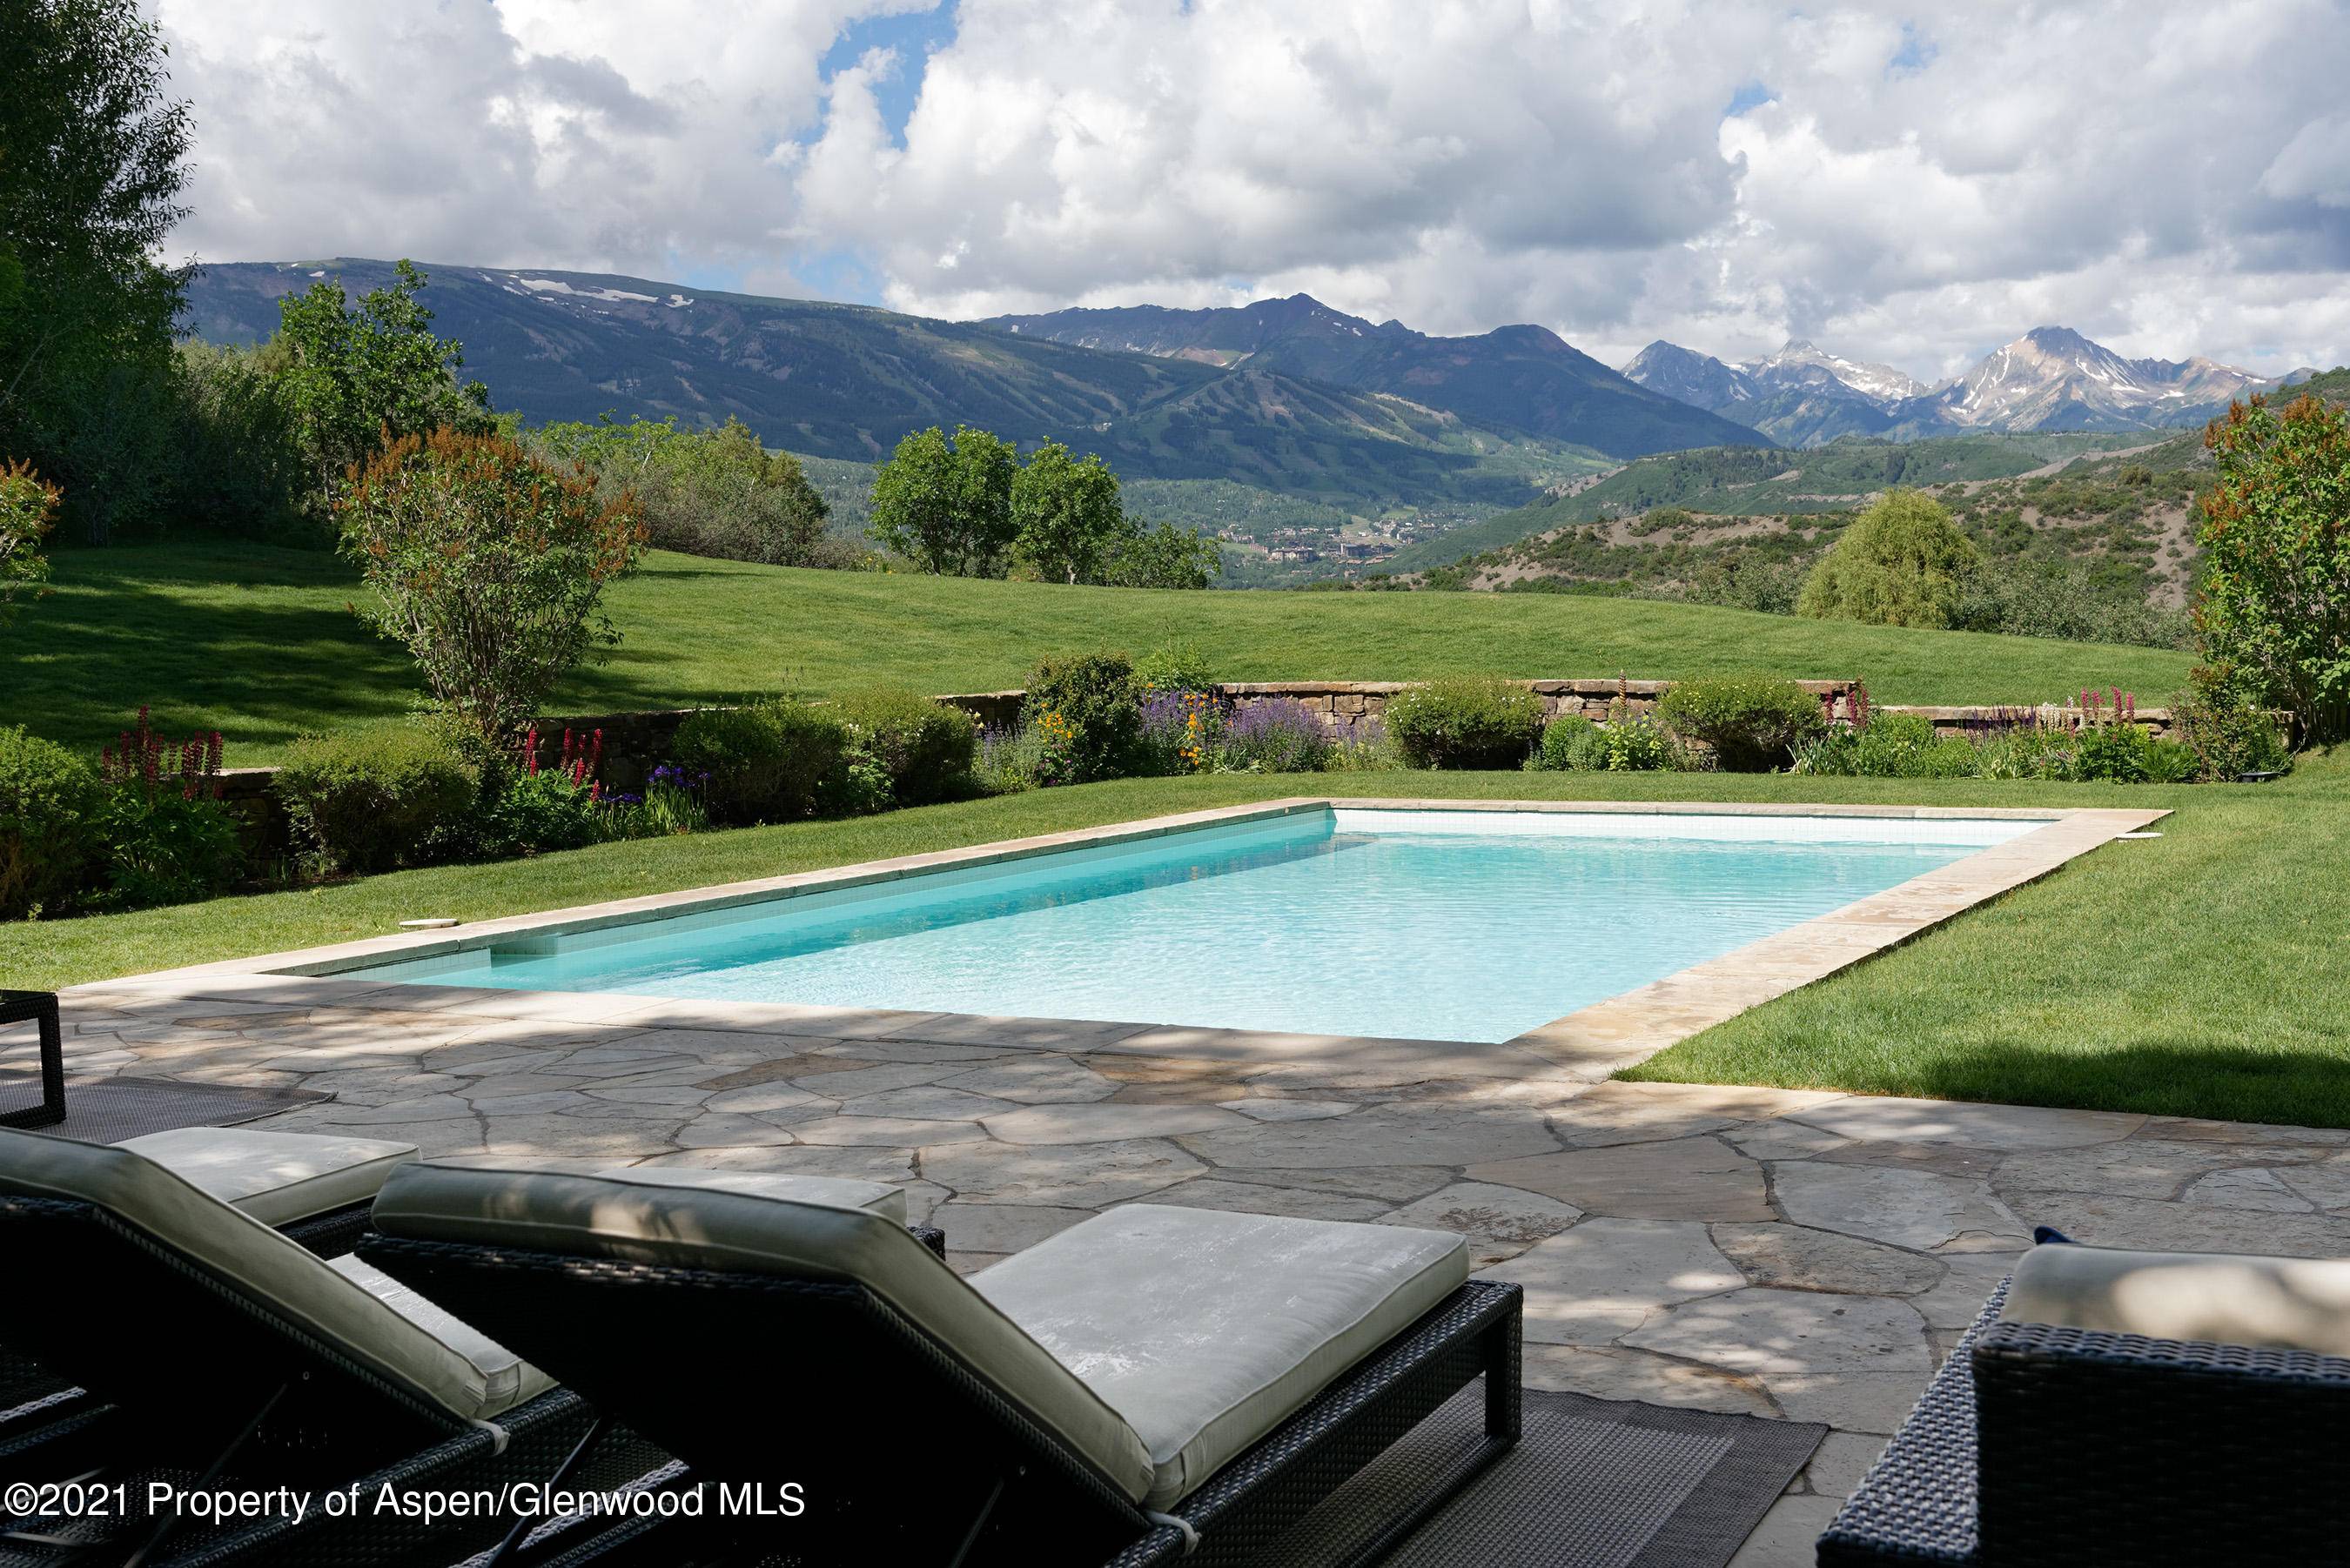 This exceptional 35 acre property has gorgeous views, a heated Pool, and comes with a TDR !